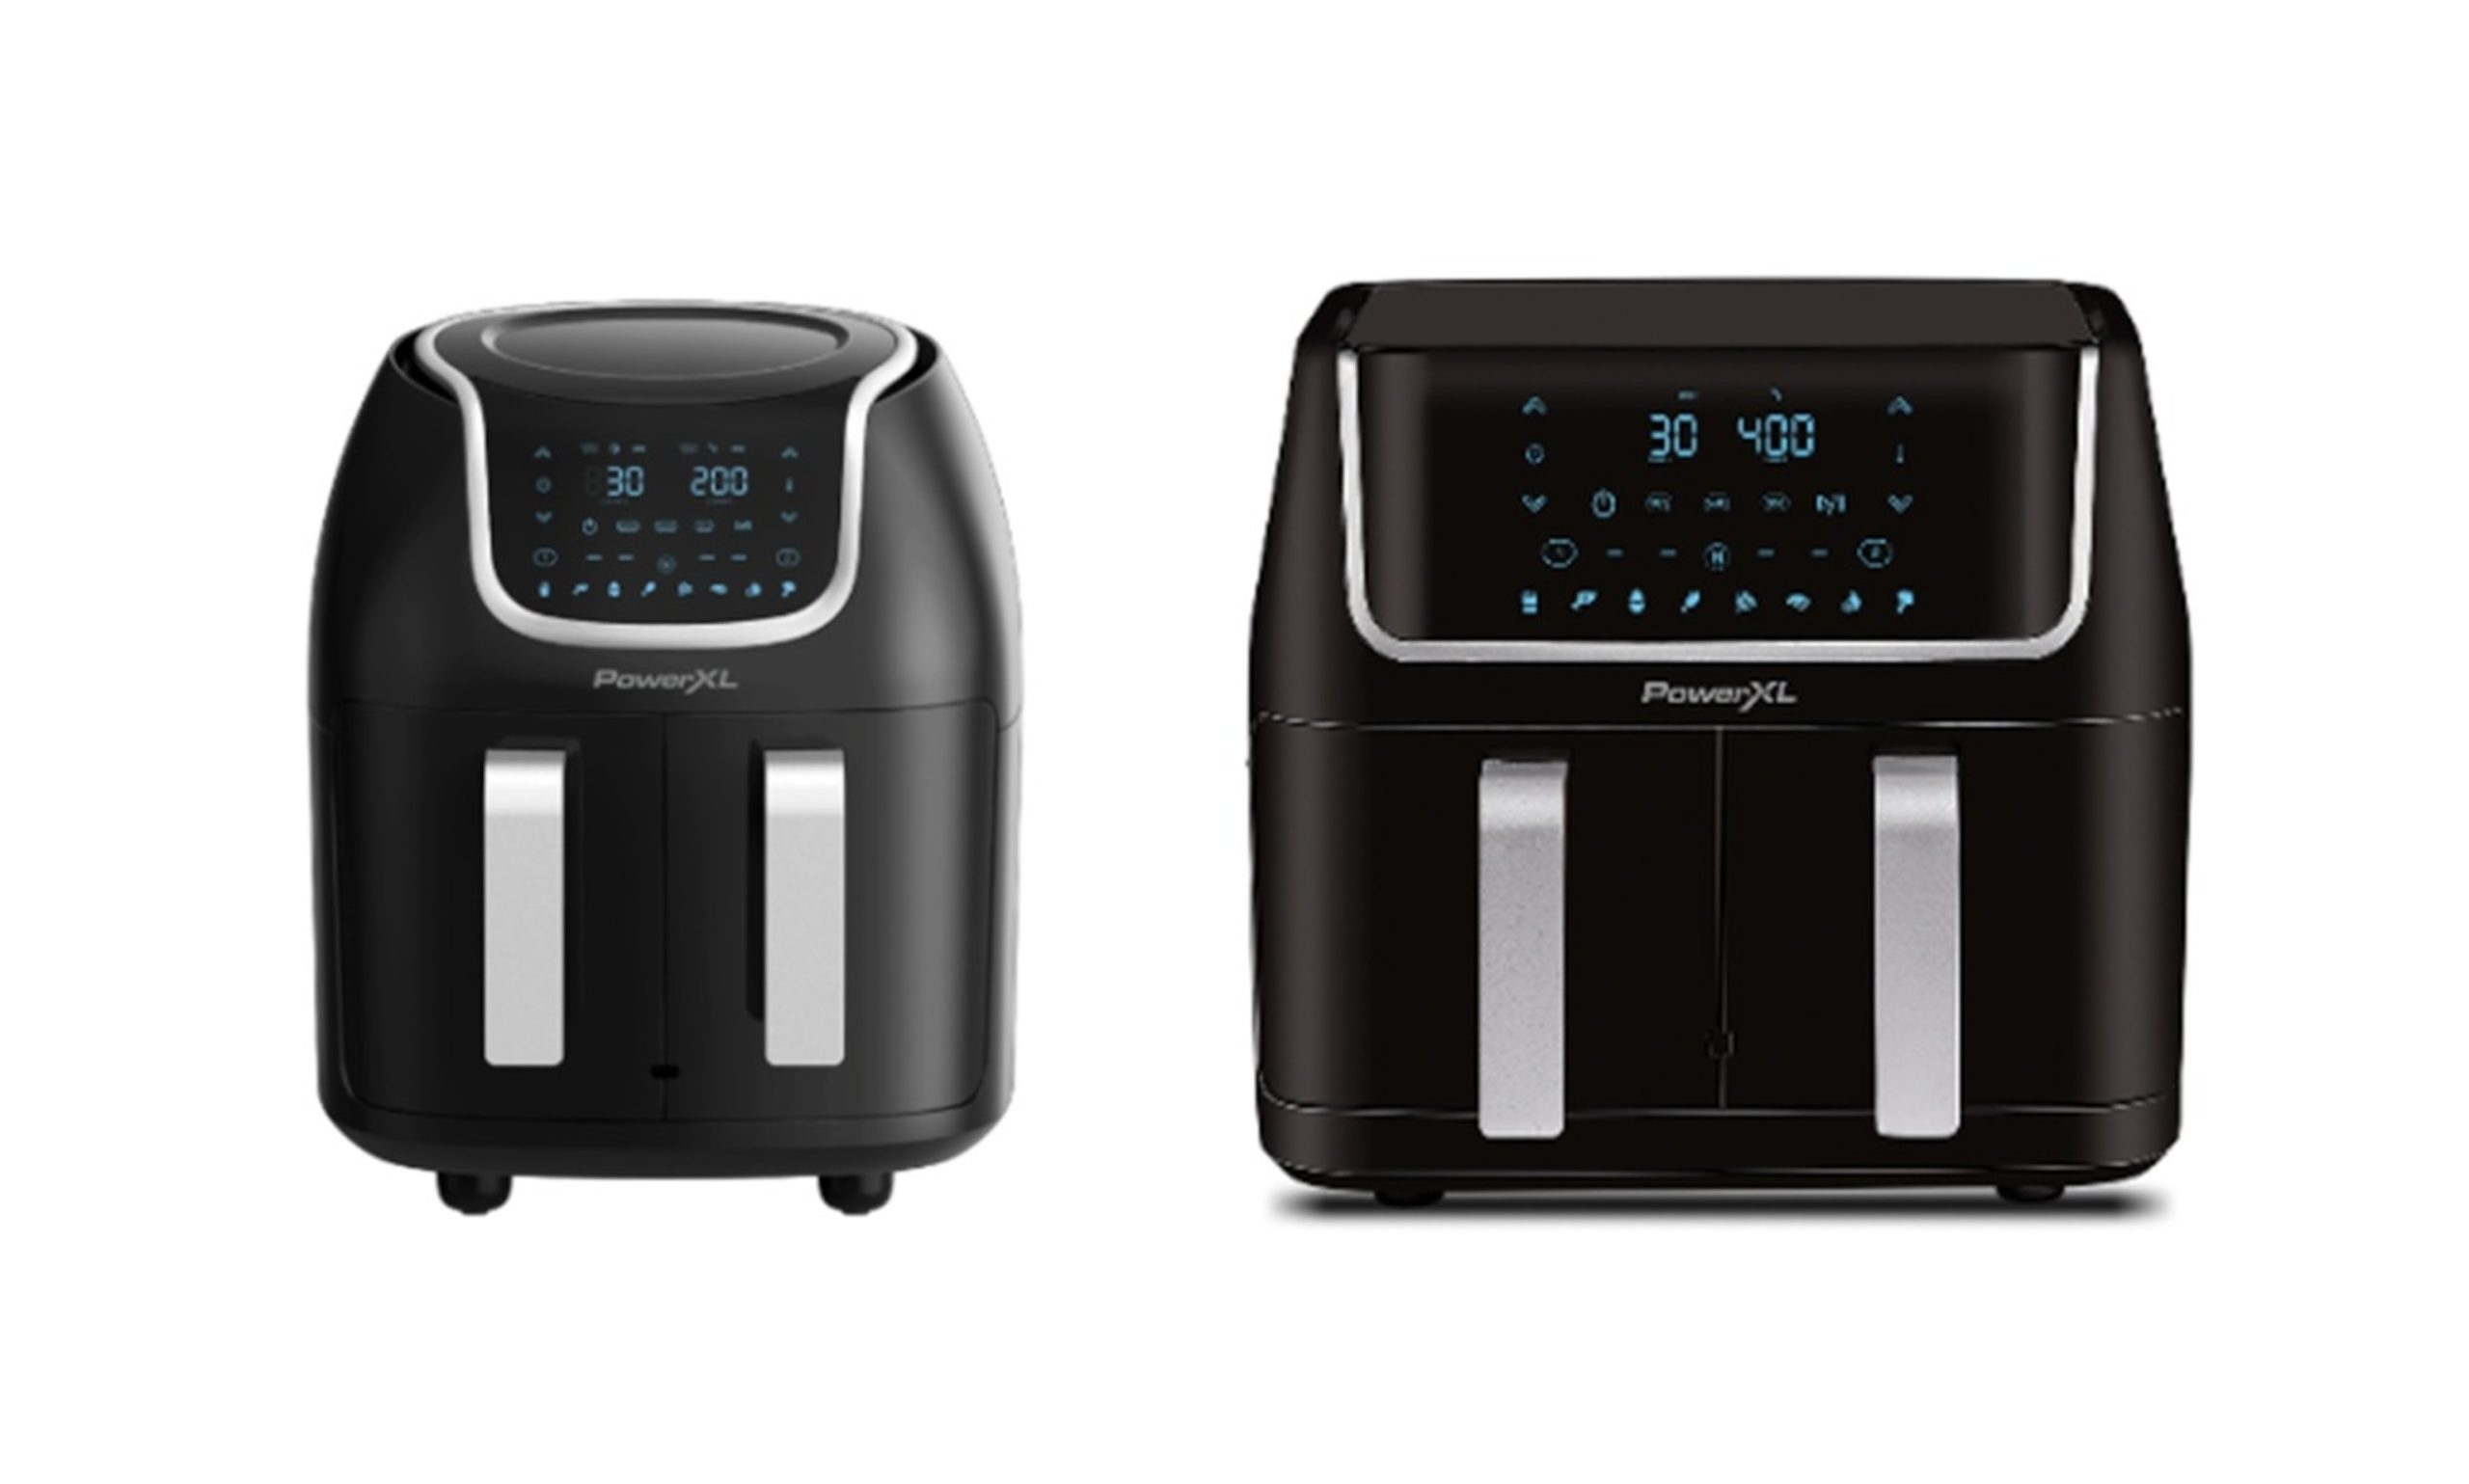 Over 300,000 Air Fryer Units Recalled by Brand Due to Potential 'Burn Hazard'